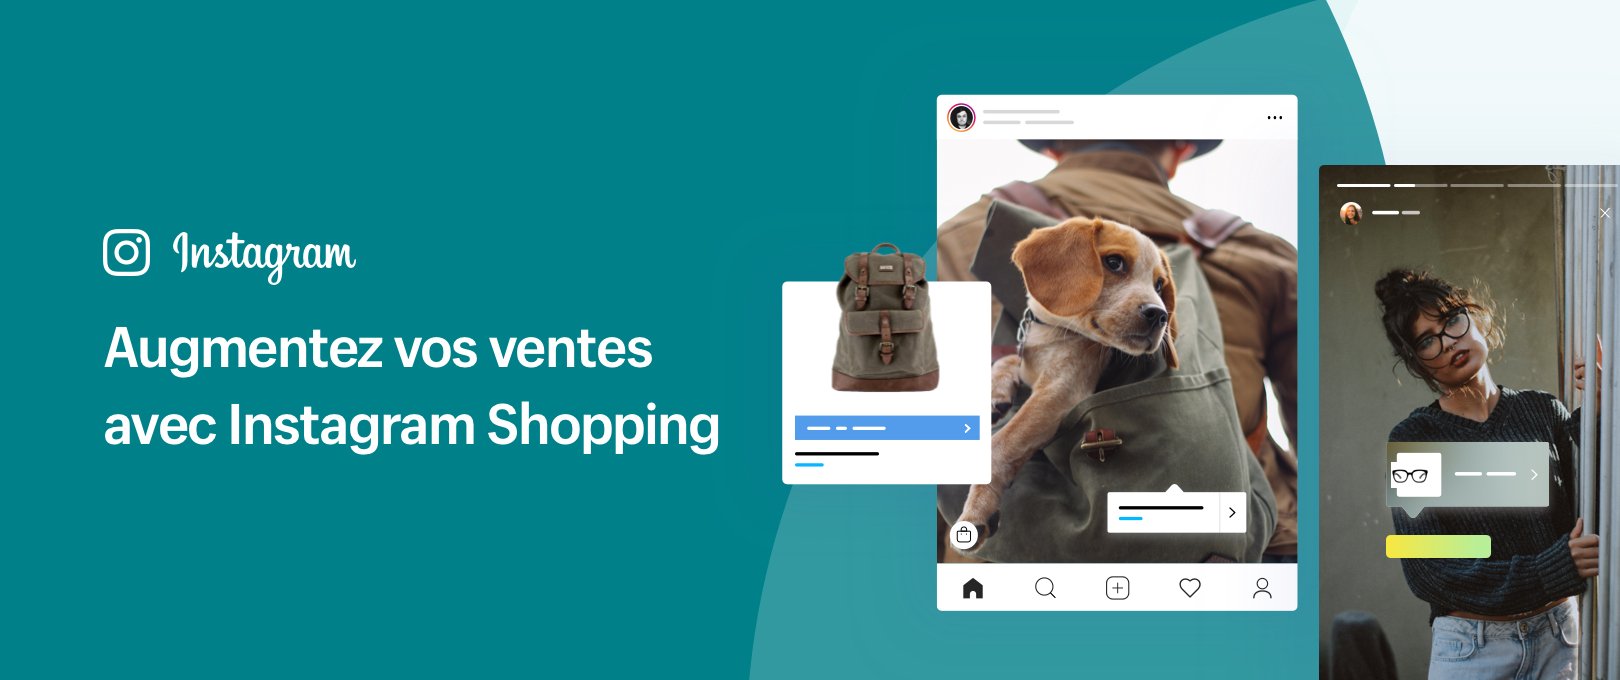 Le canal Instagram Shopping